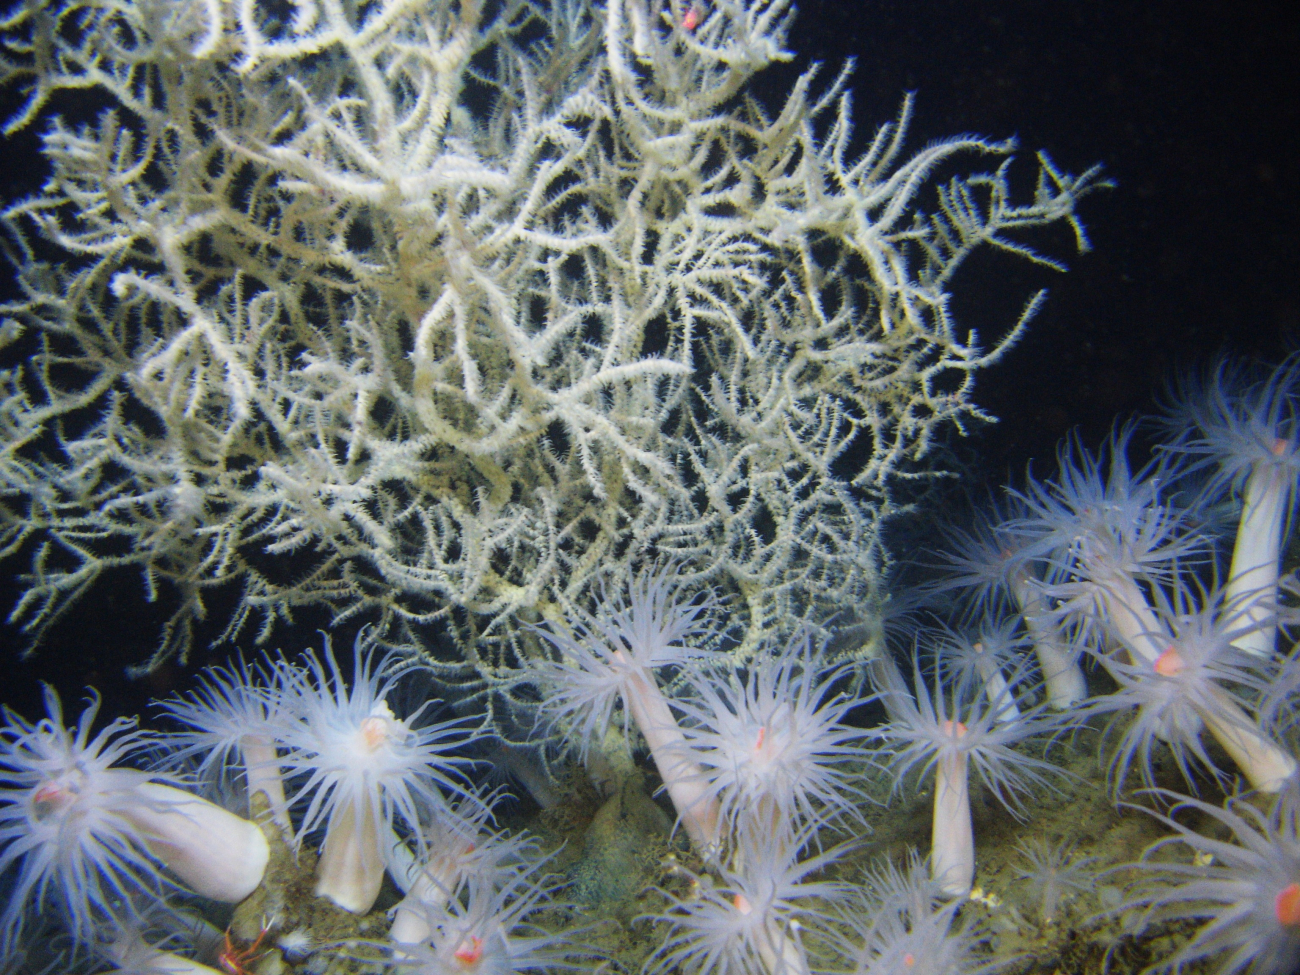 A forest of large white anemones with orange mouths and a large white blackcoral bush (Leiopathes glabberima) 